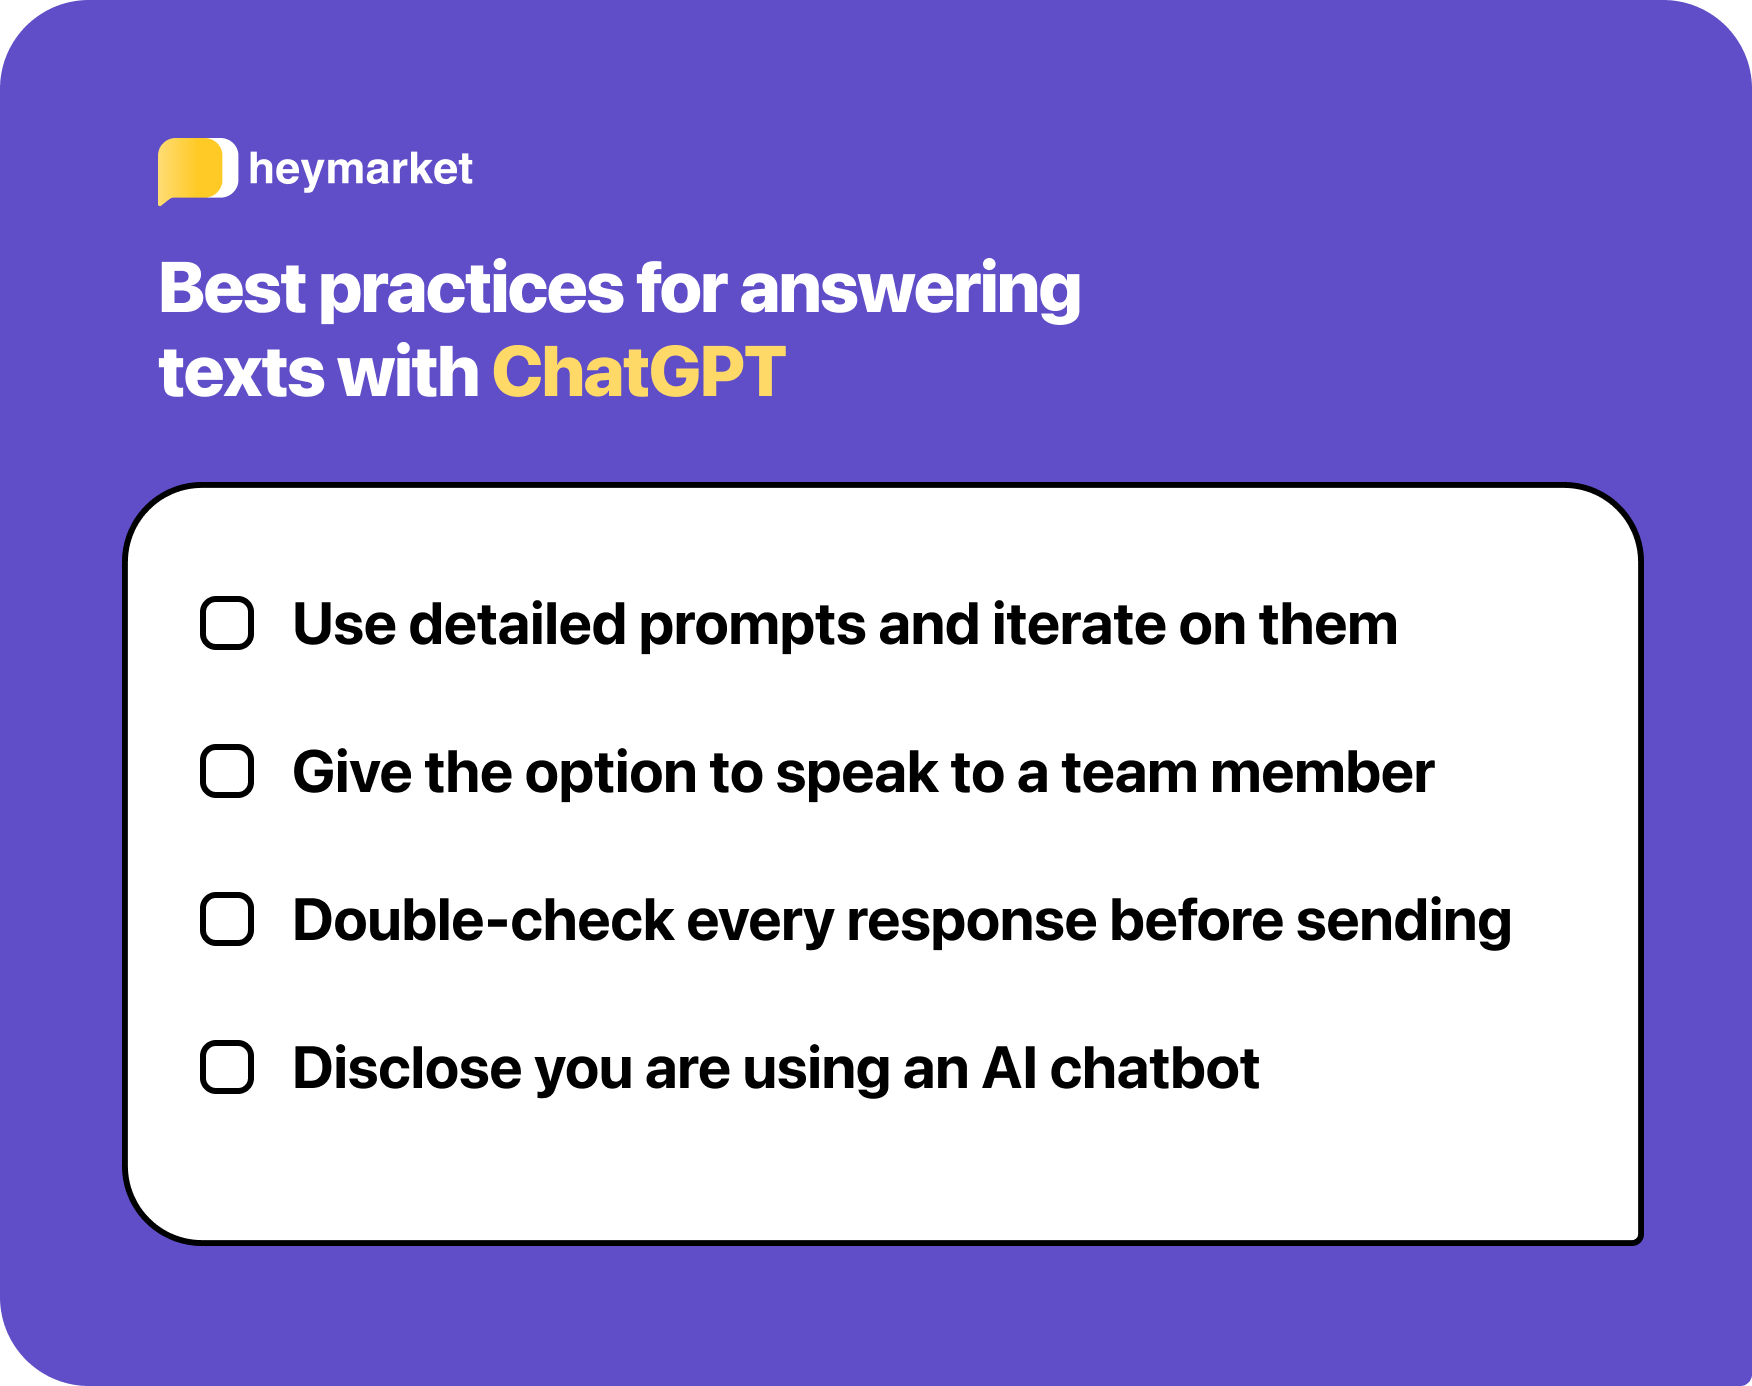 Tips for responding to texts with ChatGPT.